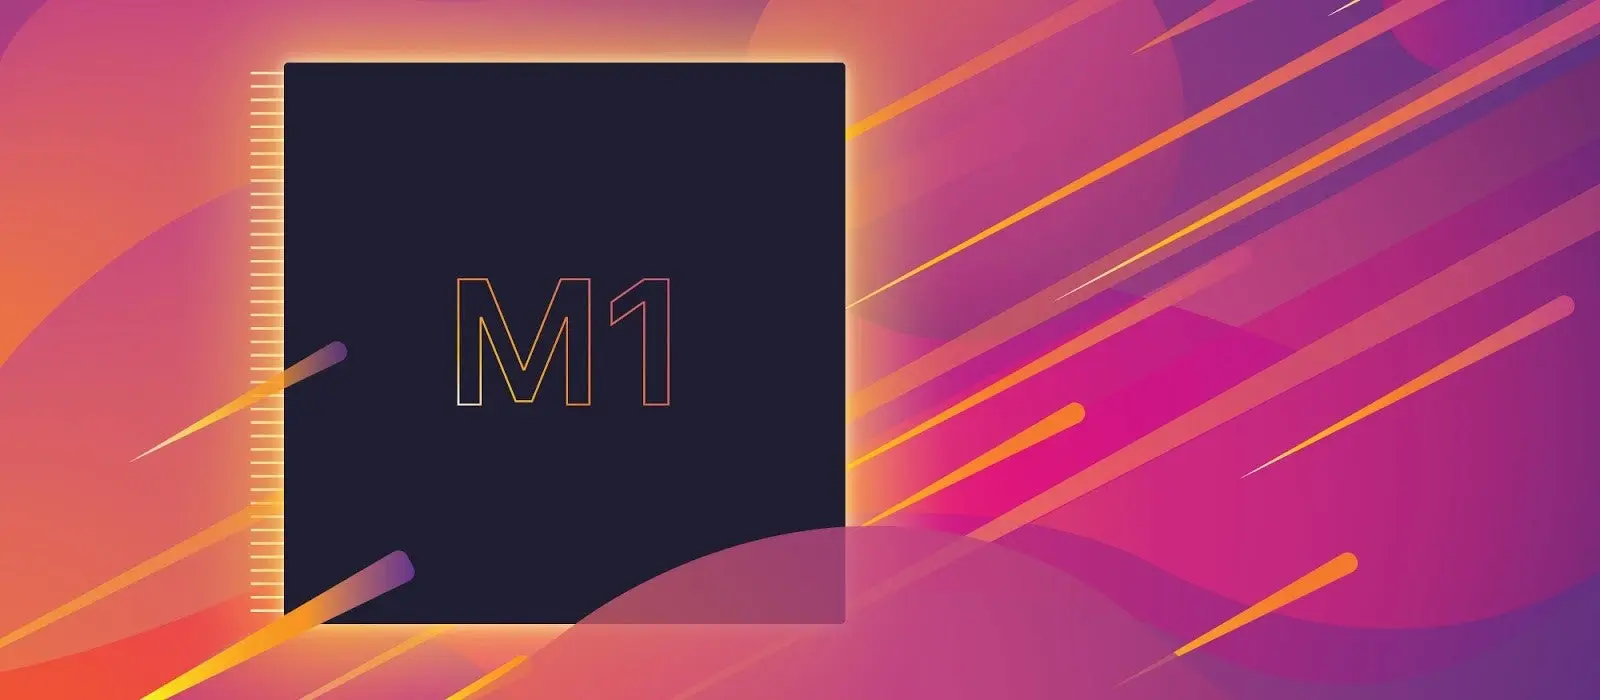 M1 written on a colorful background. 